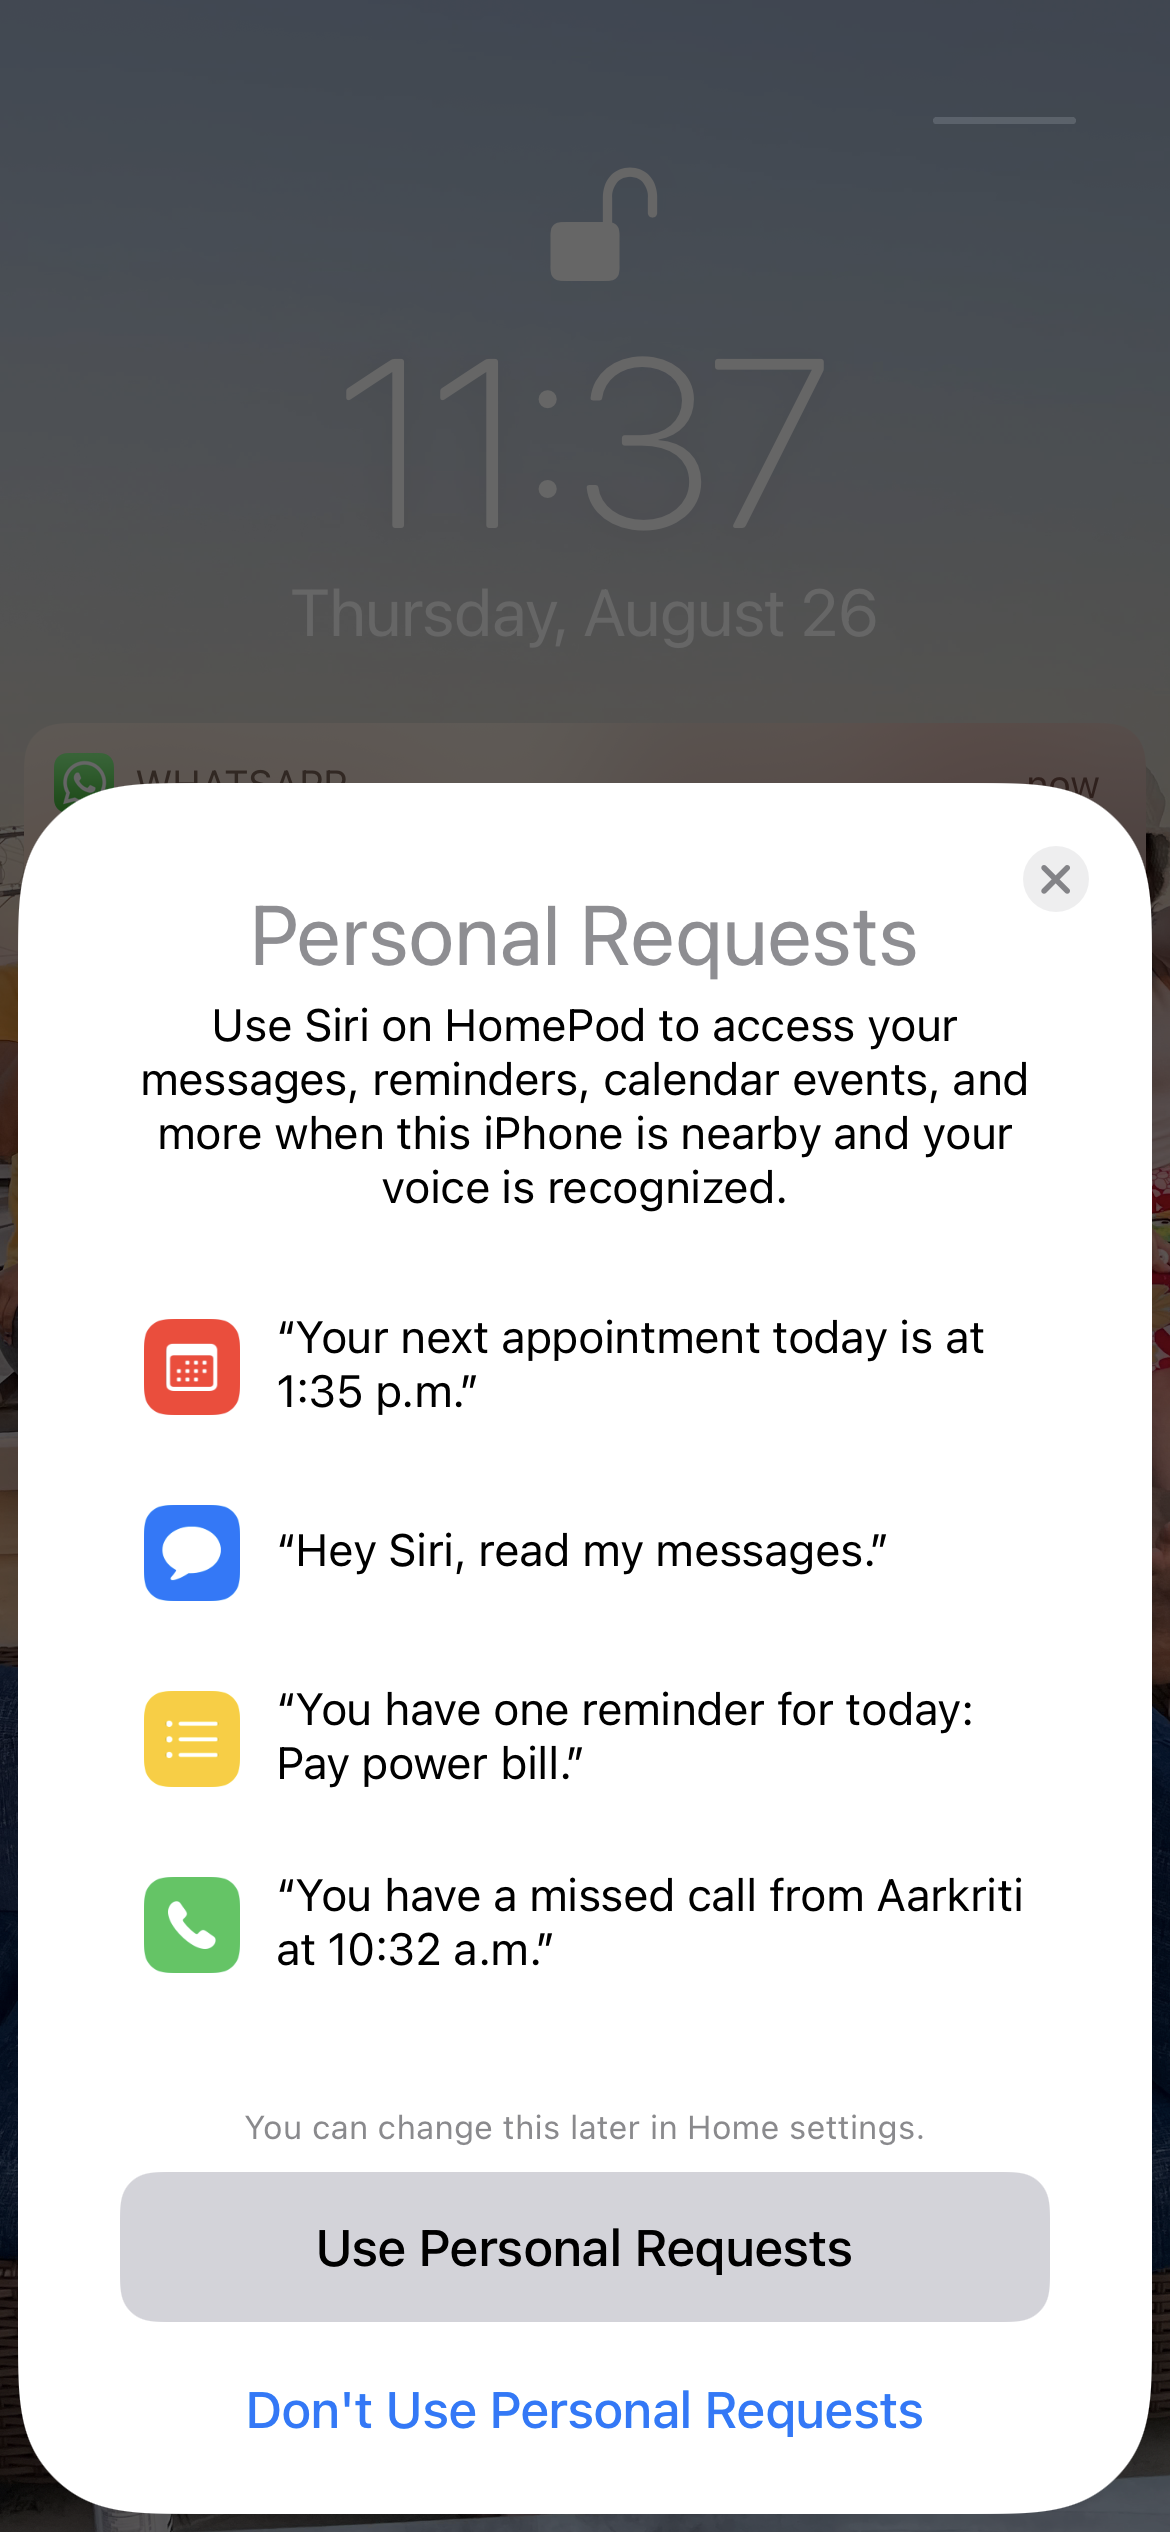 Screenshot of HomePod setup screen on iPhone displaying Personal Requests.